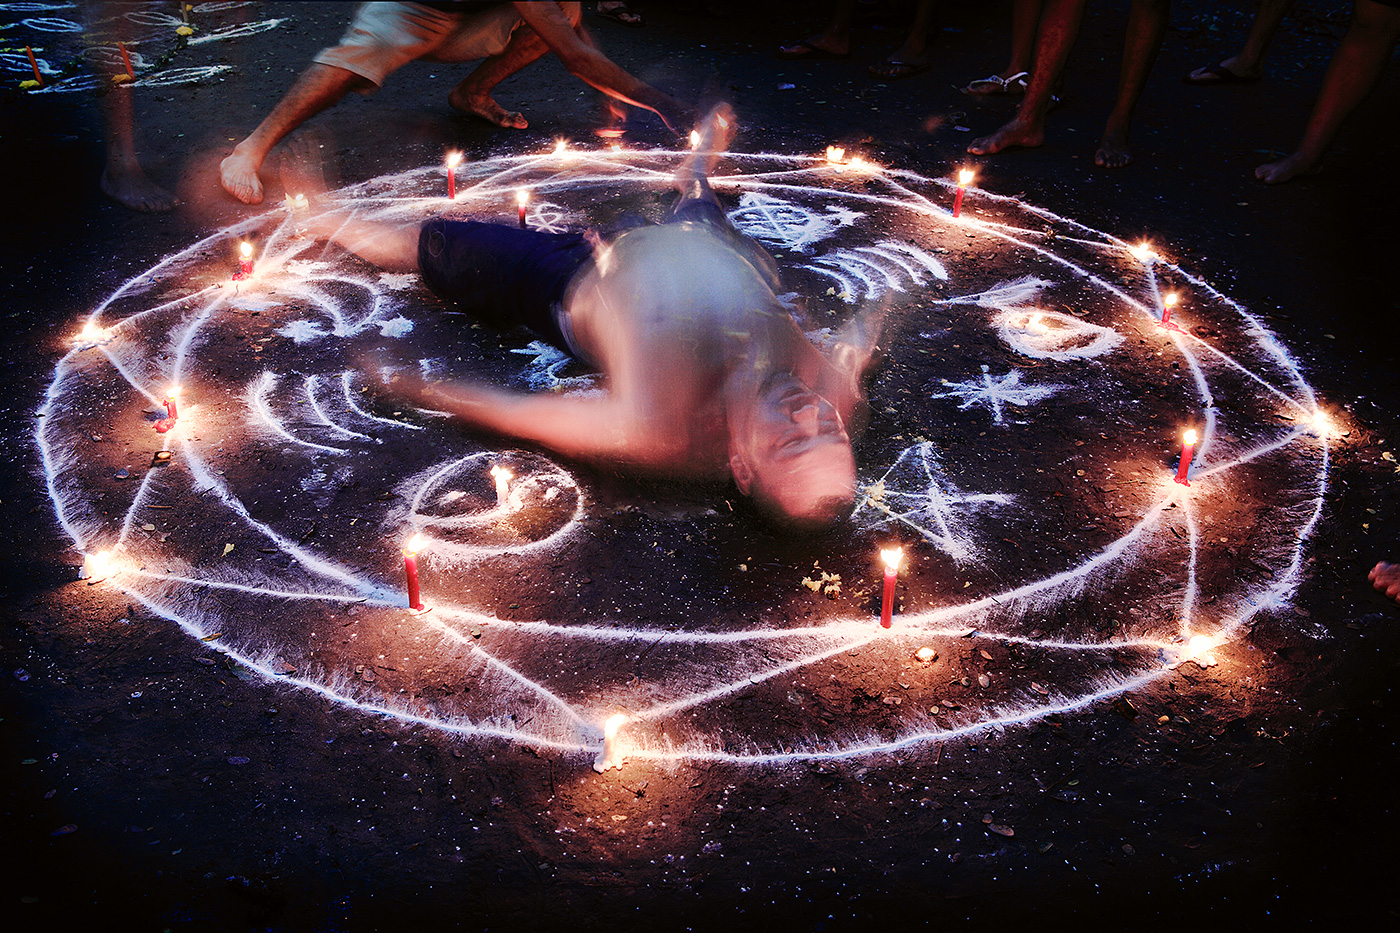 Writhing in convulsions, the power of the oracle brings this man into a trance as the spirit enters his body.